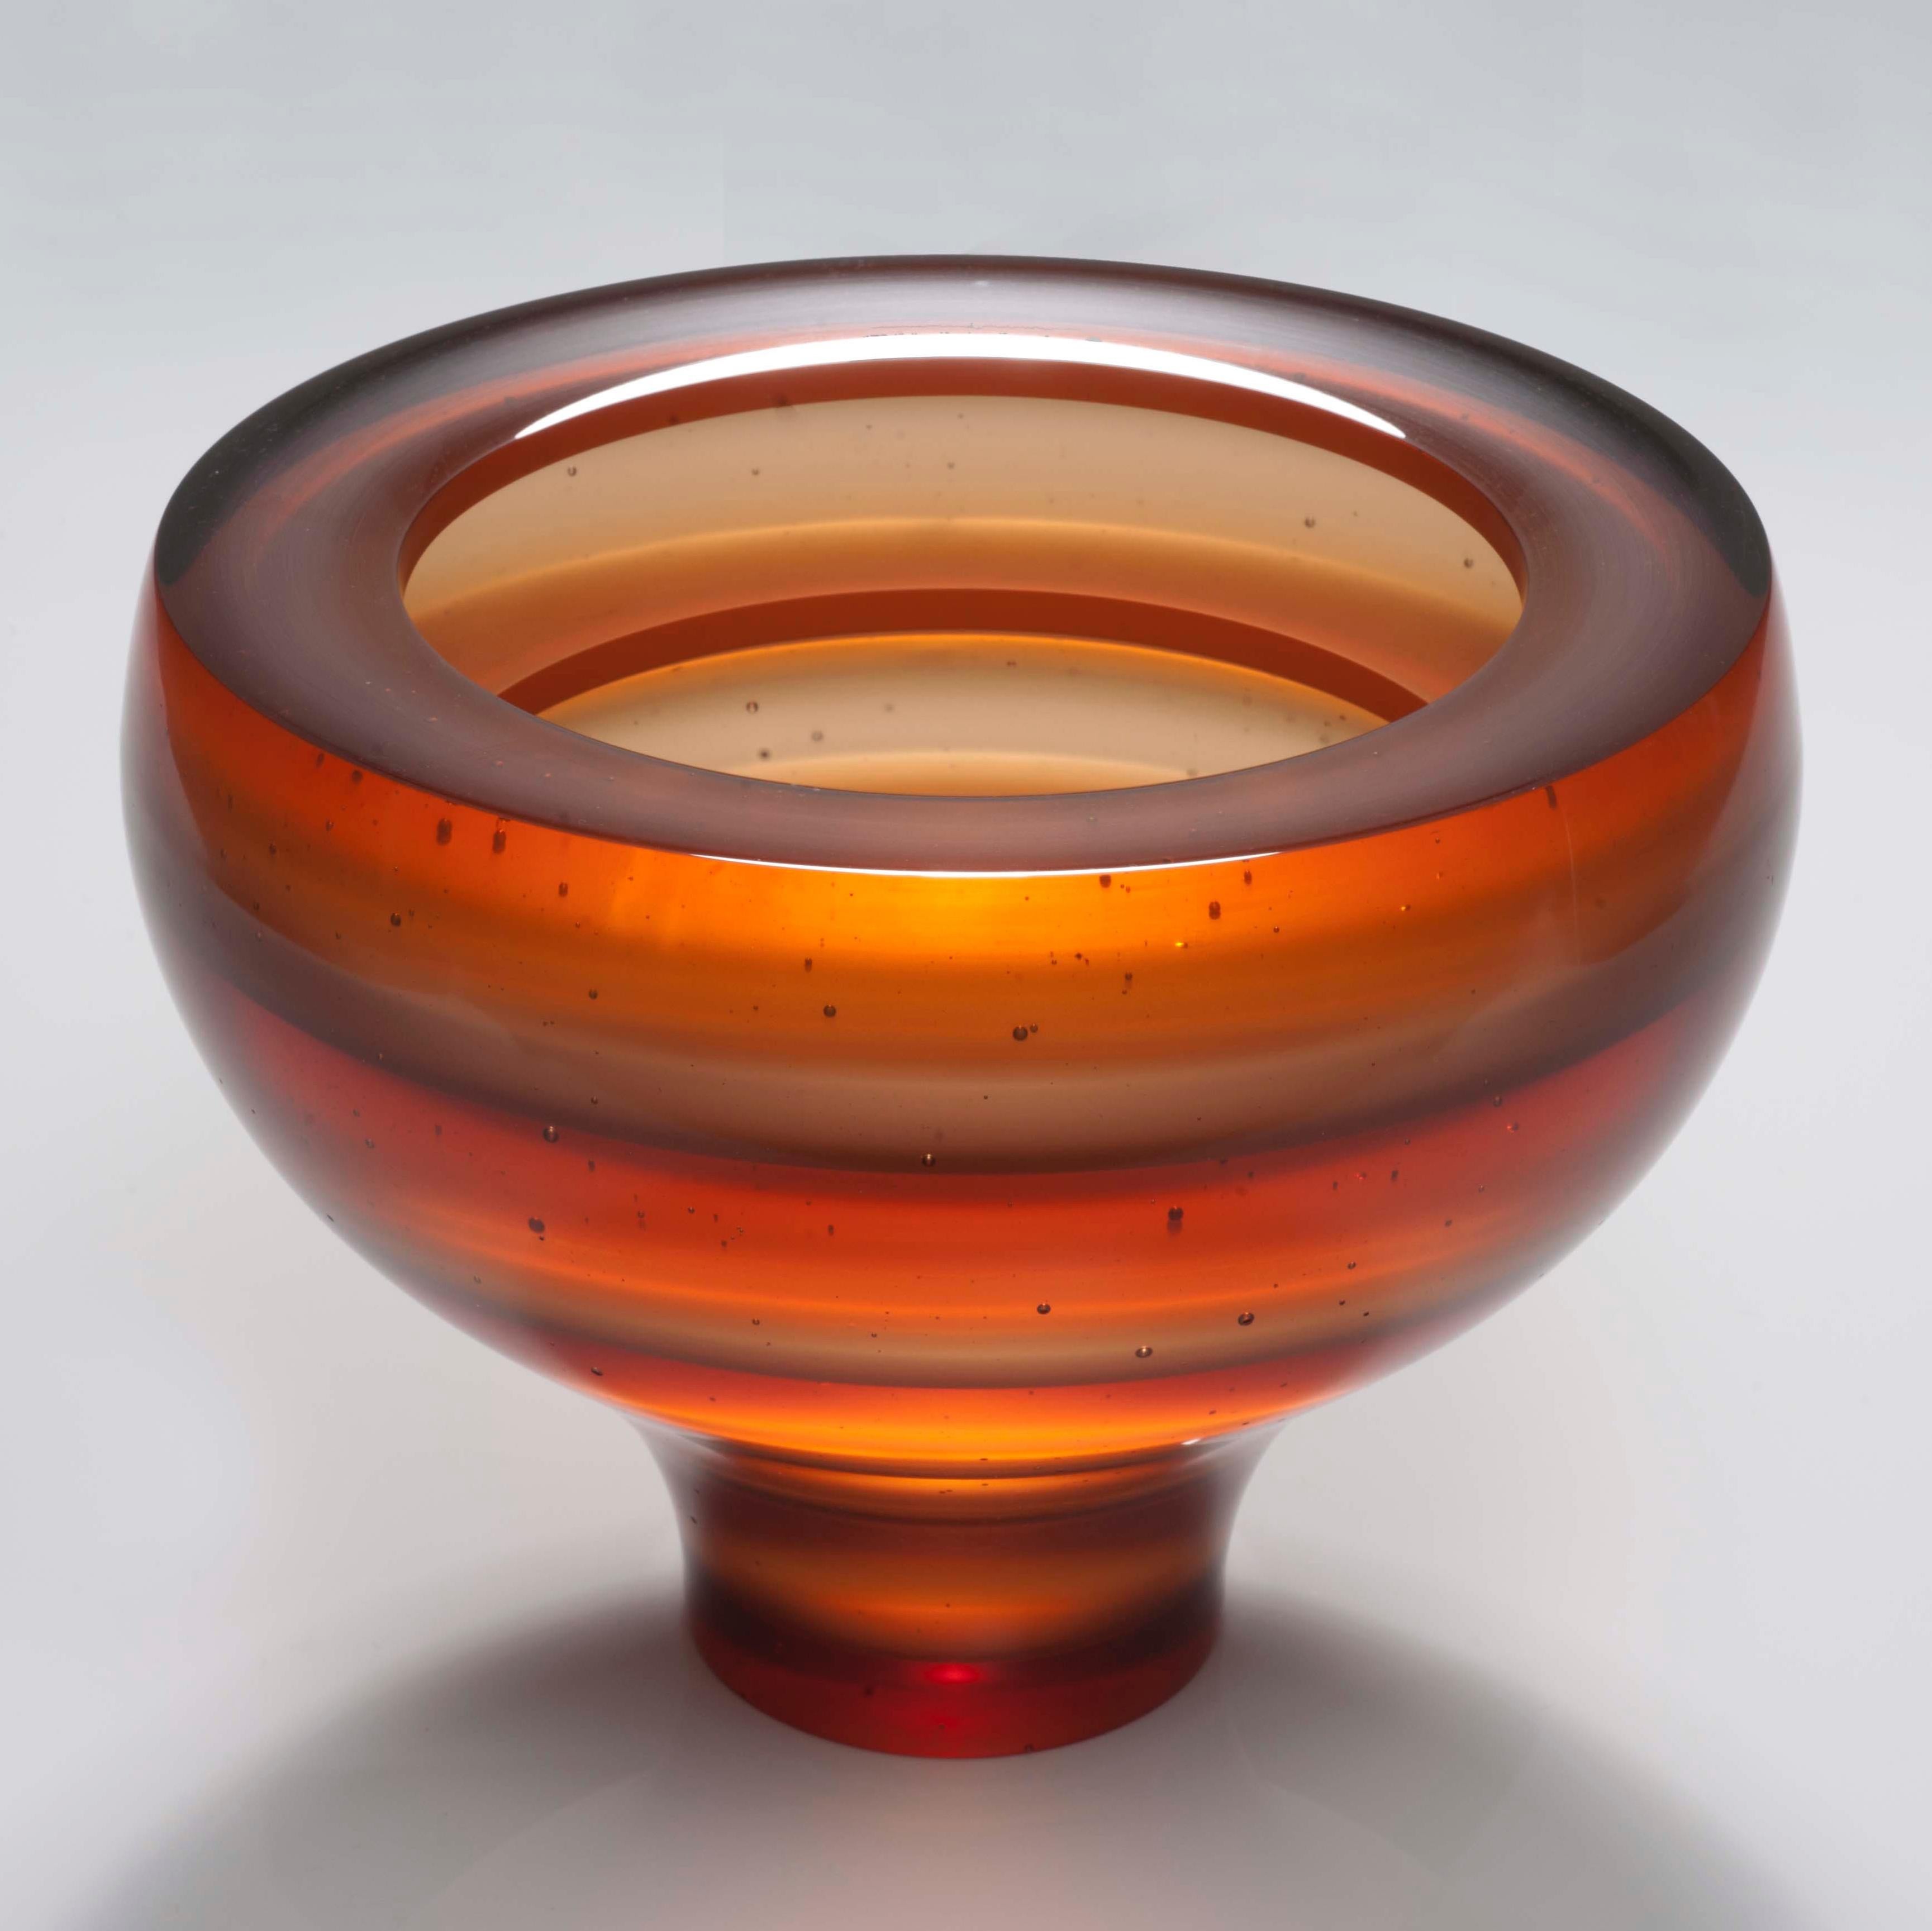 Luka is a cast glass artwork in a beautiful soft amber / orange by the British artist Paul Stopler. With a smooth exterior, the interior is stepped into five sections by four ridged protruding 